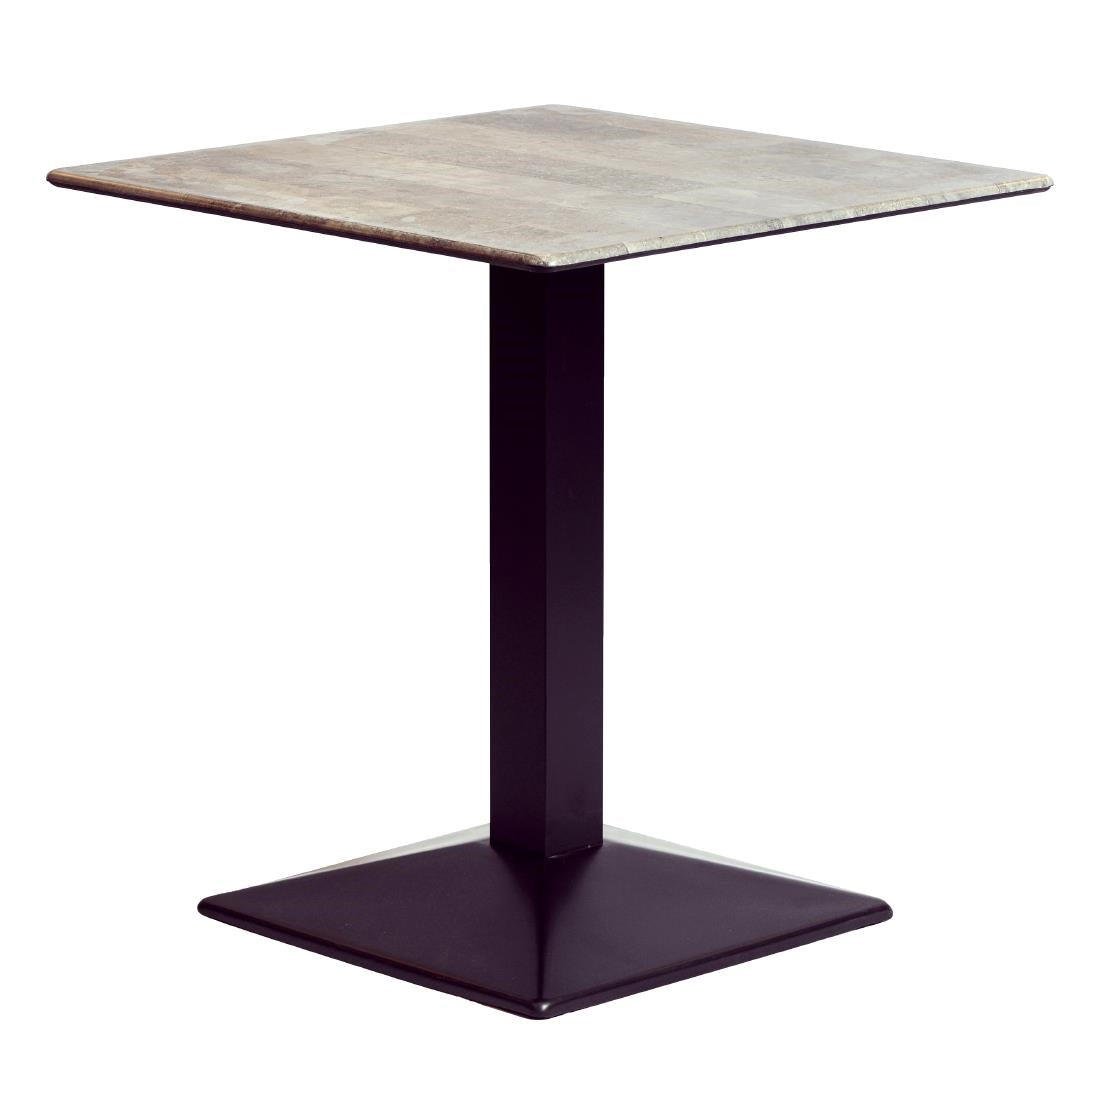 CZ811 Turin Metal Base Square Dining Table with Laminate Top Concrete 600mm JD Catering Equipment Solutions Ltd